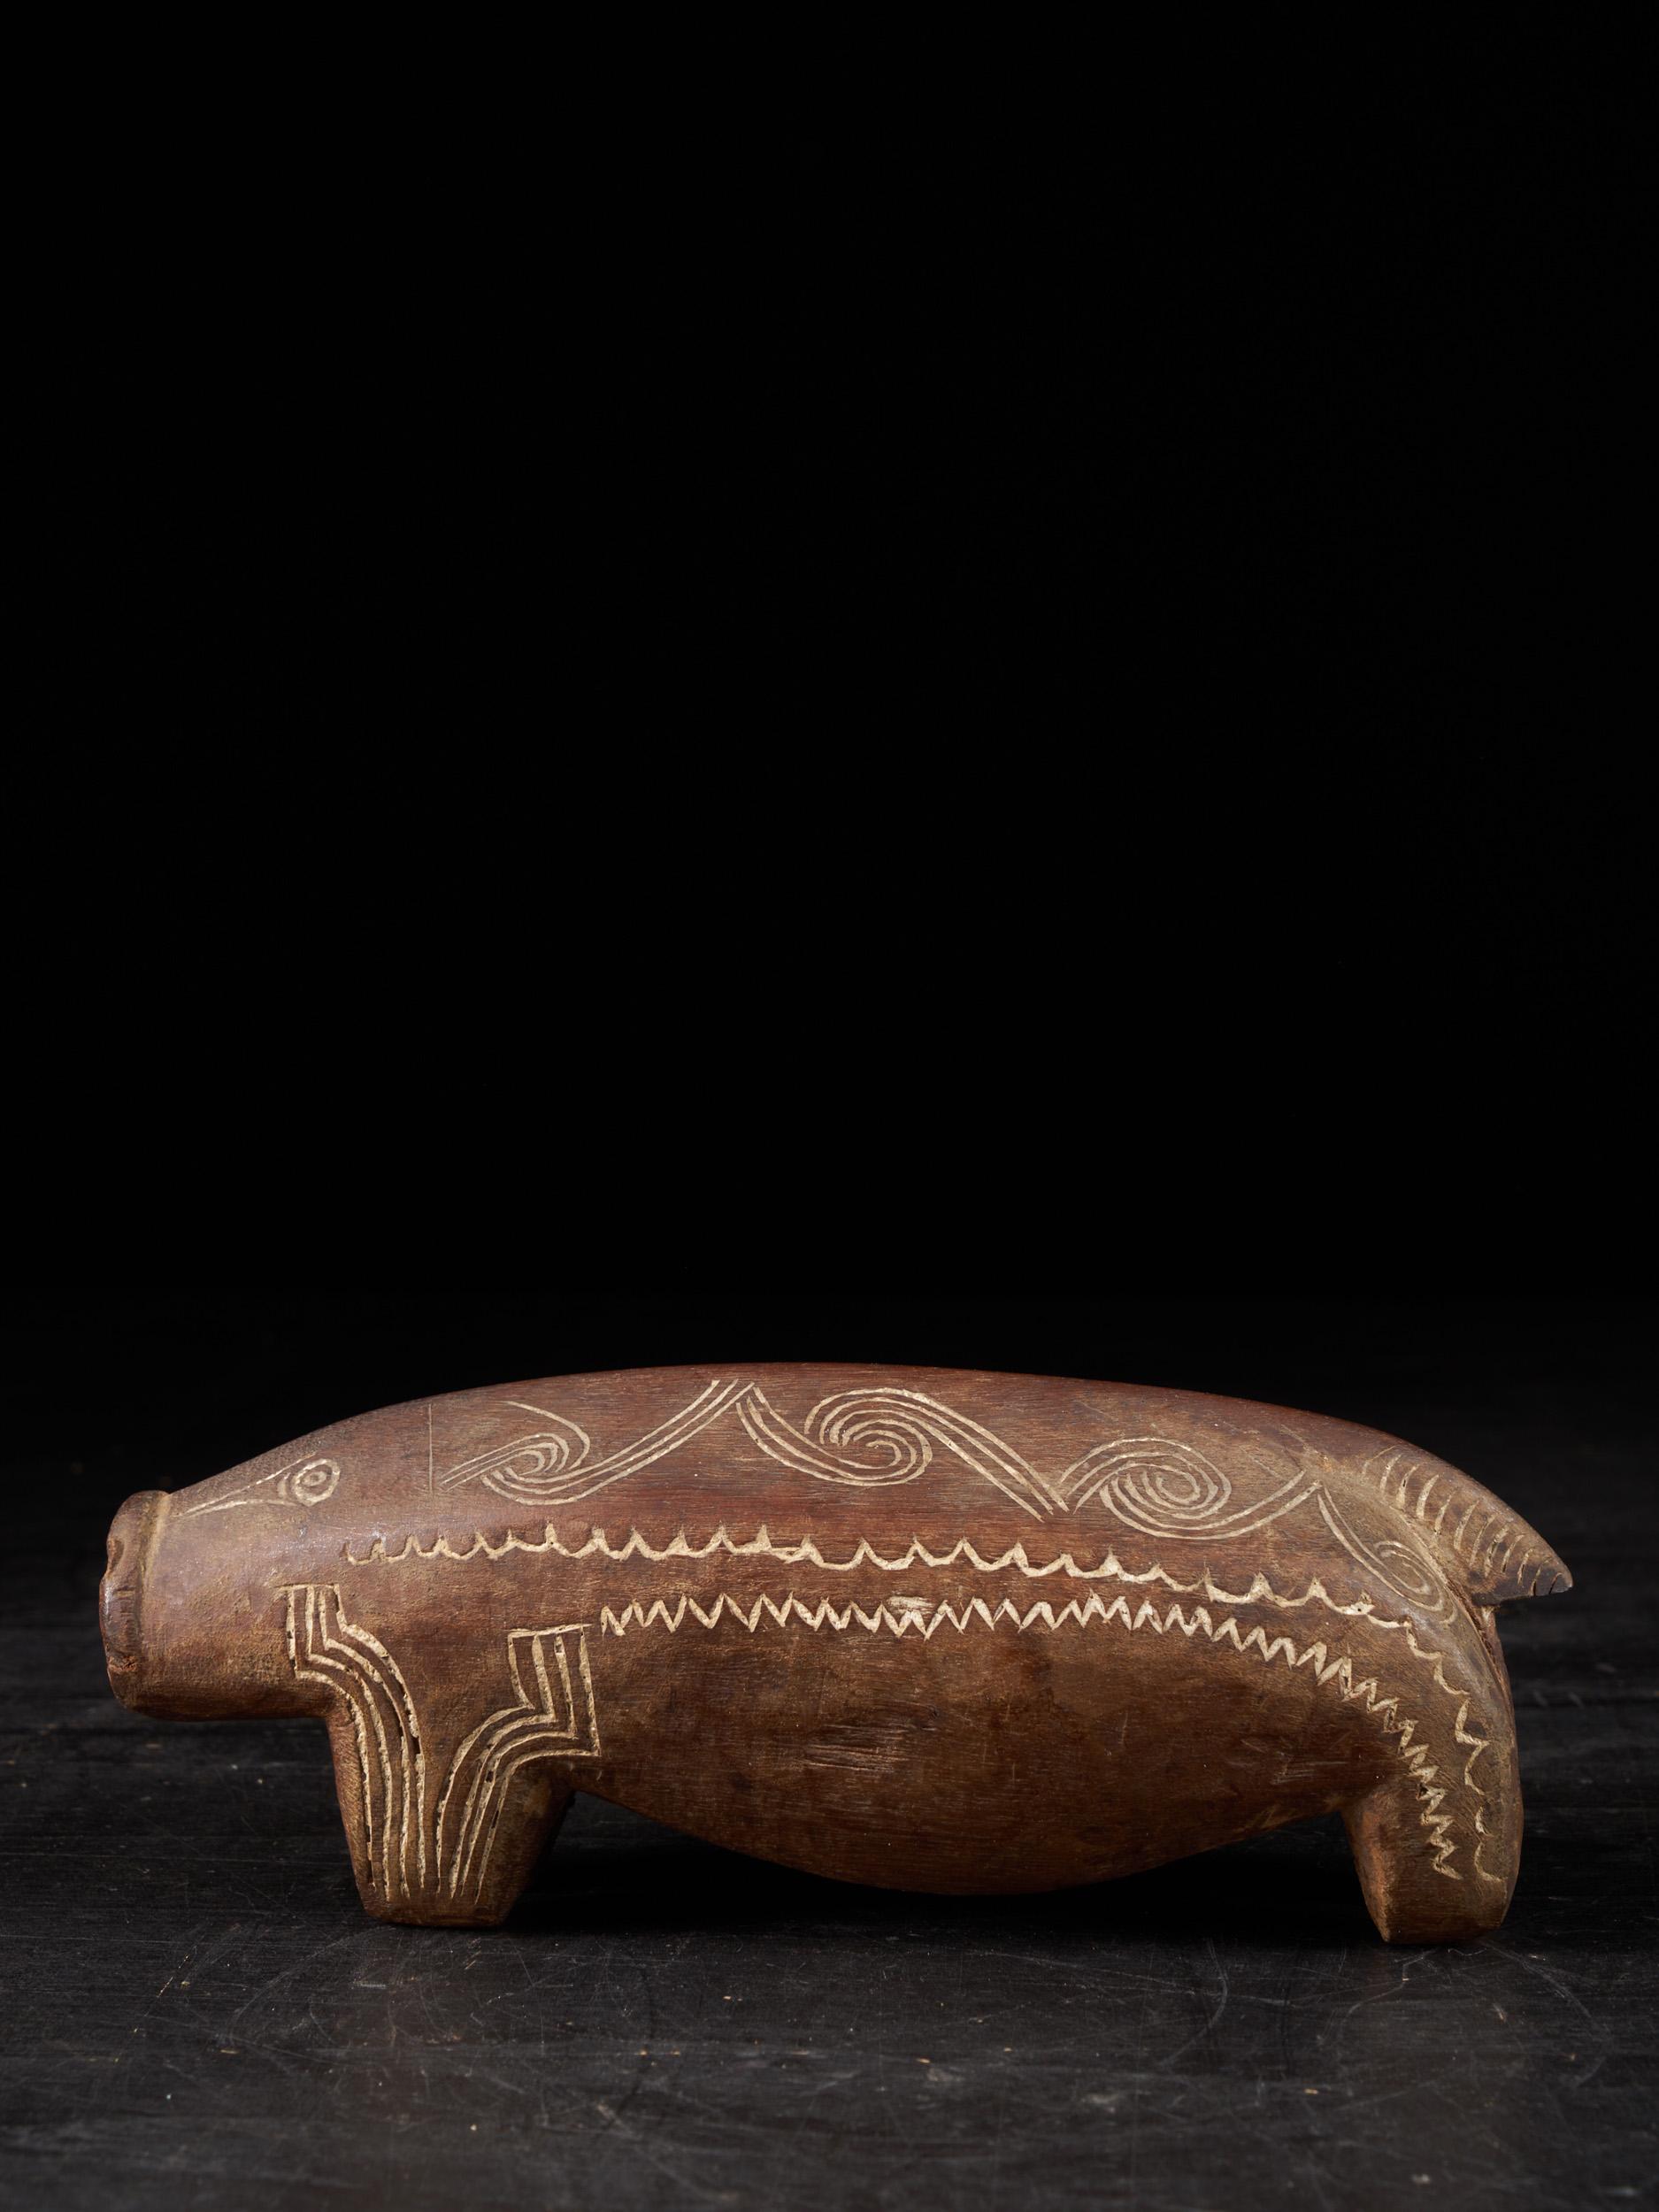 Late 19th to early 20th century New Guinea, Trobriand Islands, Milne Bay, Massim People carved wooden pigs with incised decoration and flat paddle-style tails. The National Museum of Australia holds about 24 of these pig carvings from this era,